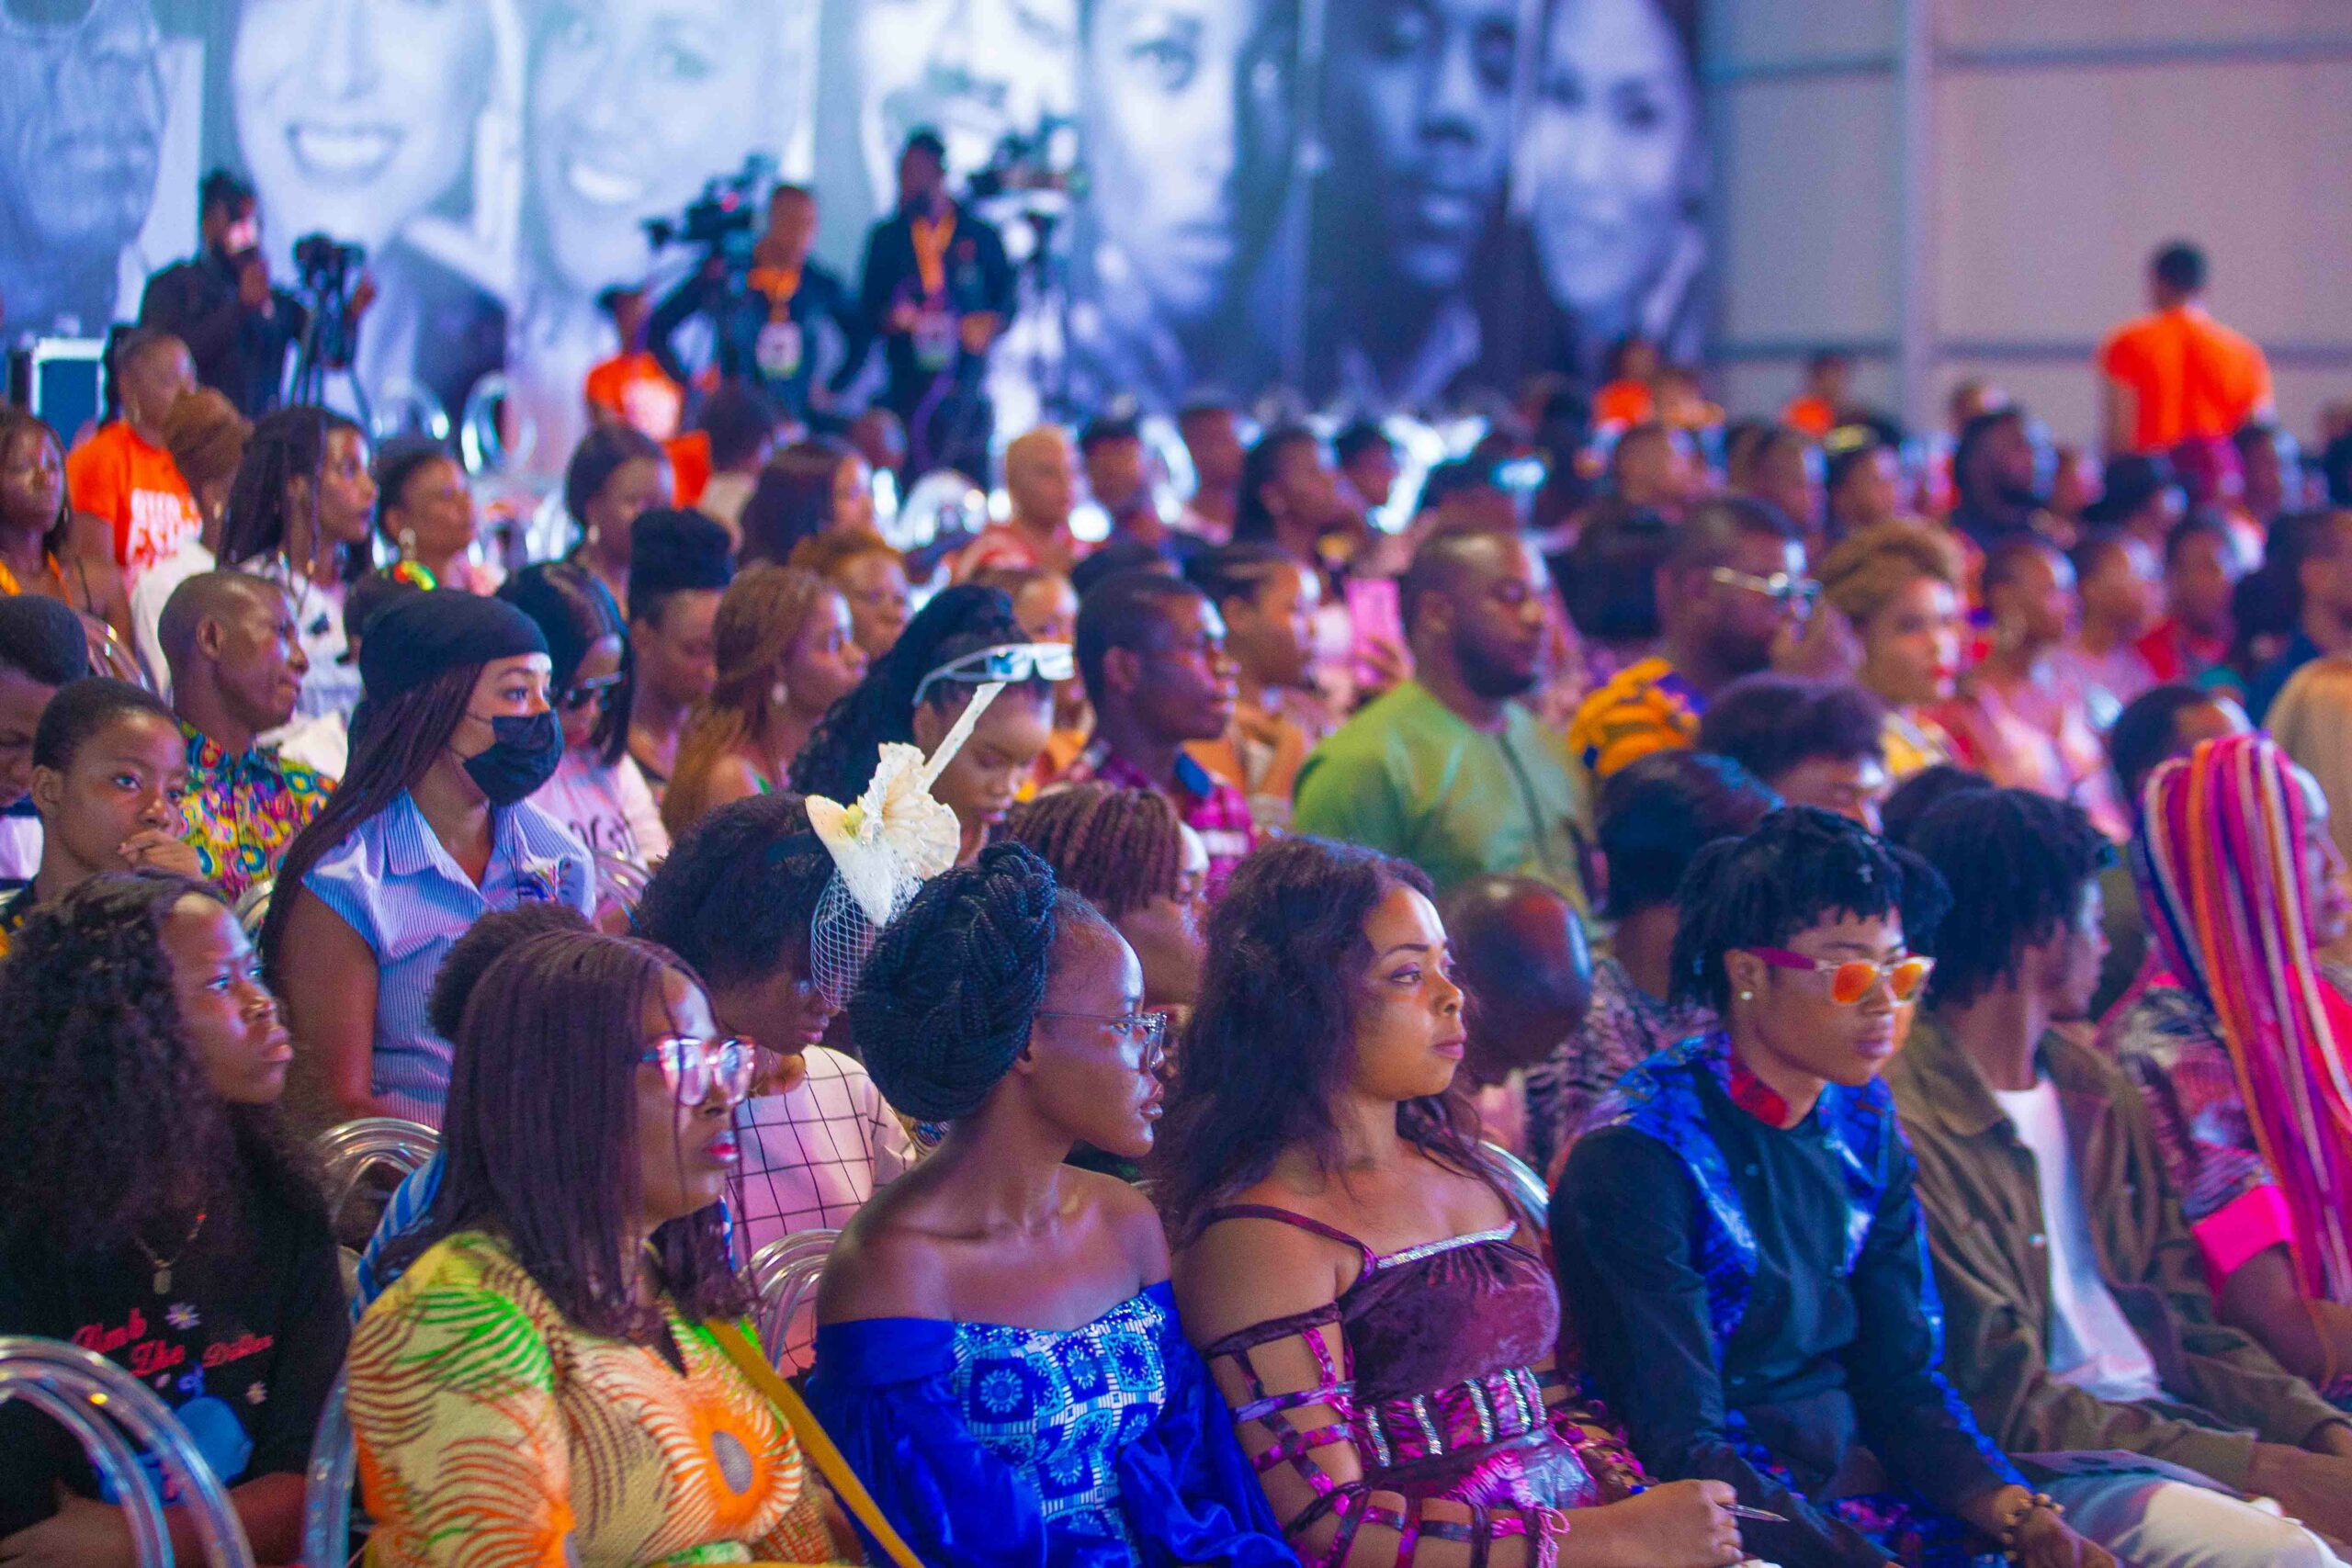 Attendees at the GTCO Fashion weekend masterclass scaled